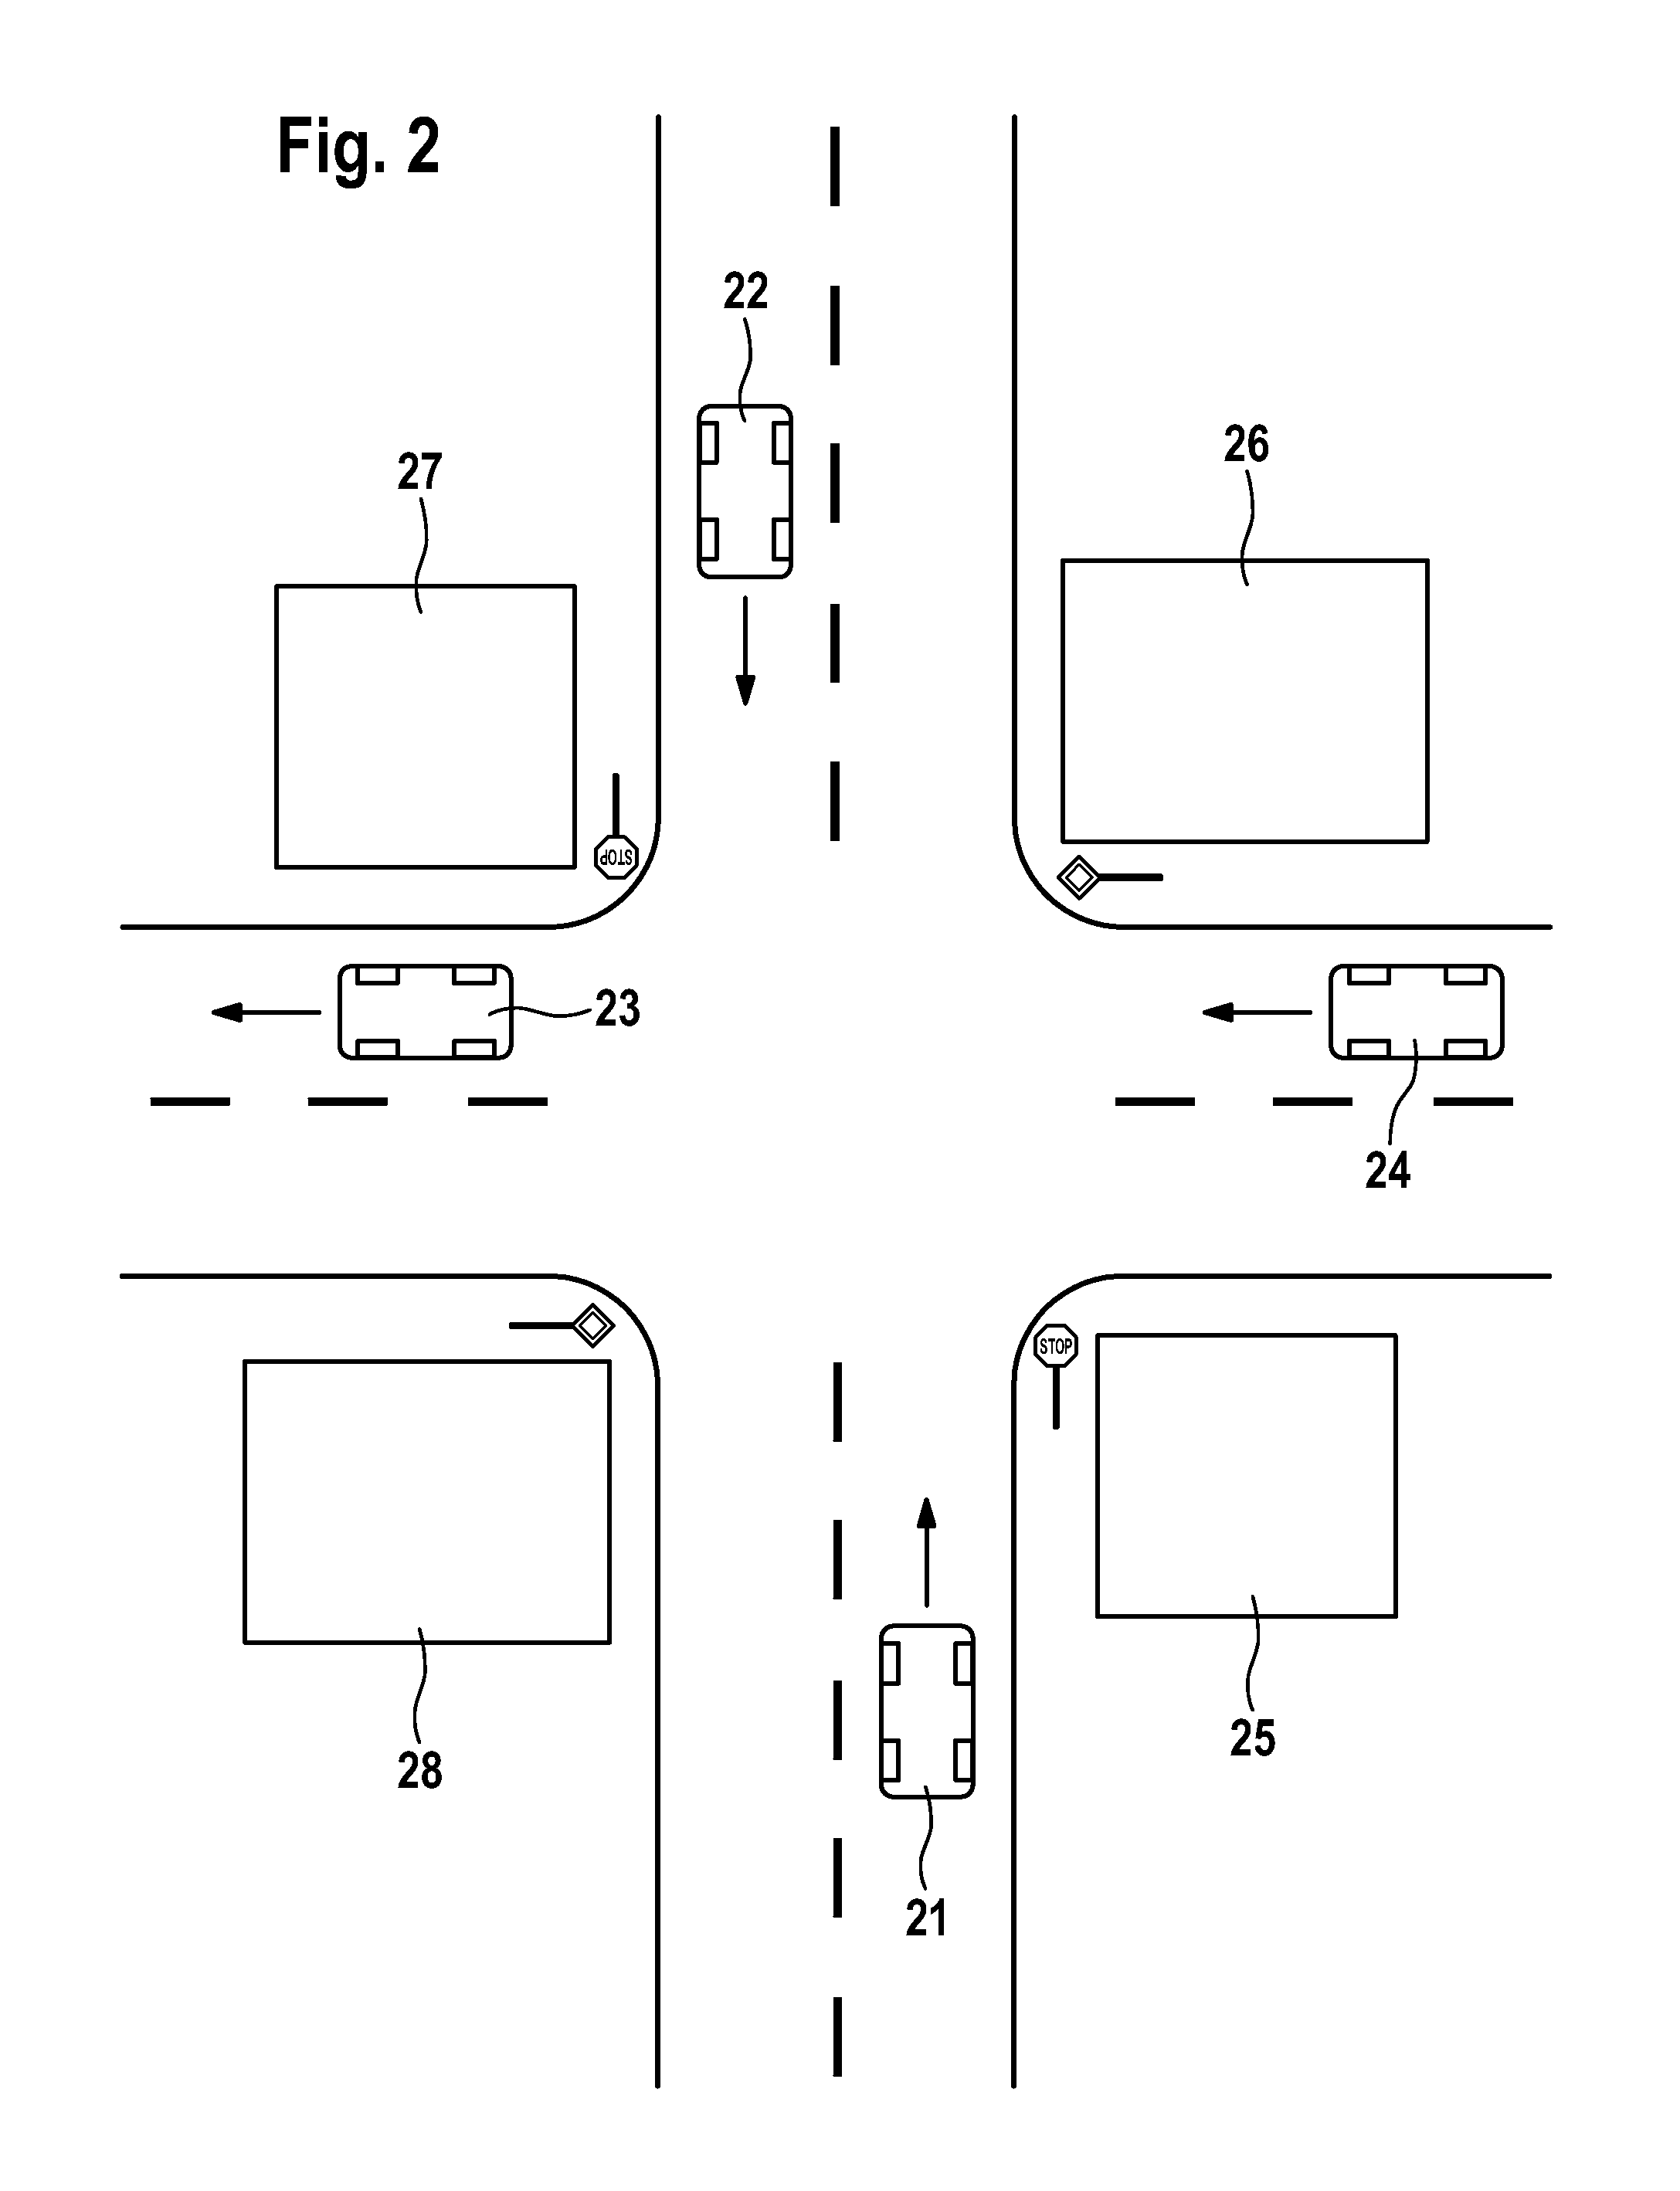 Visual driver information and warning system for a driver of a motor vehicle